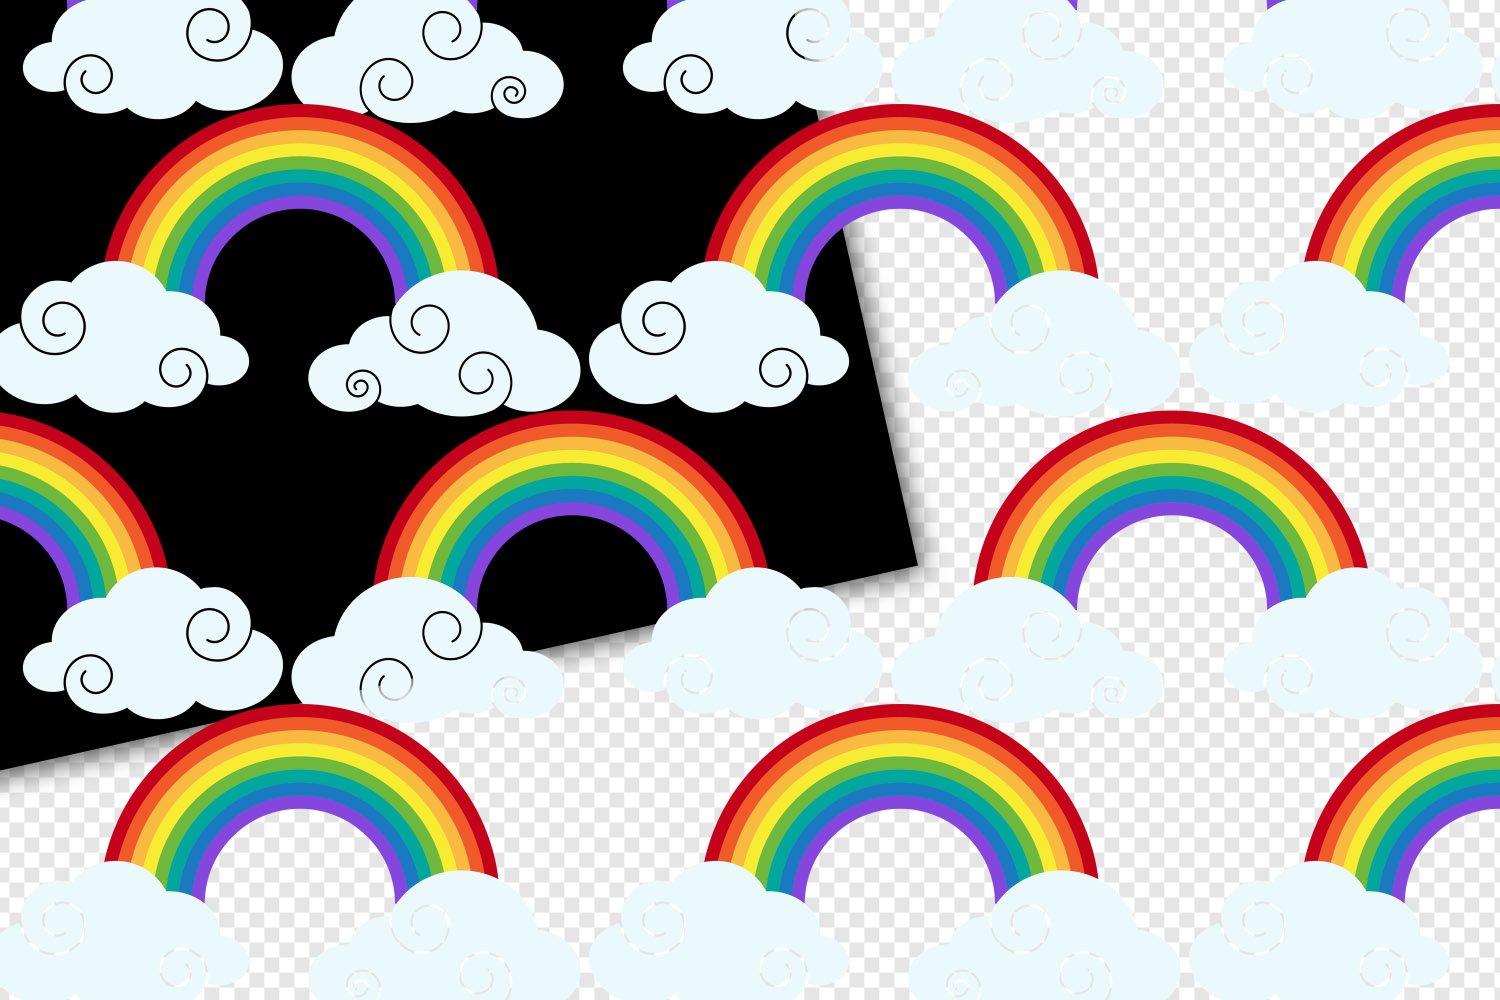 Rainbow Pattern Overlays preview image.